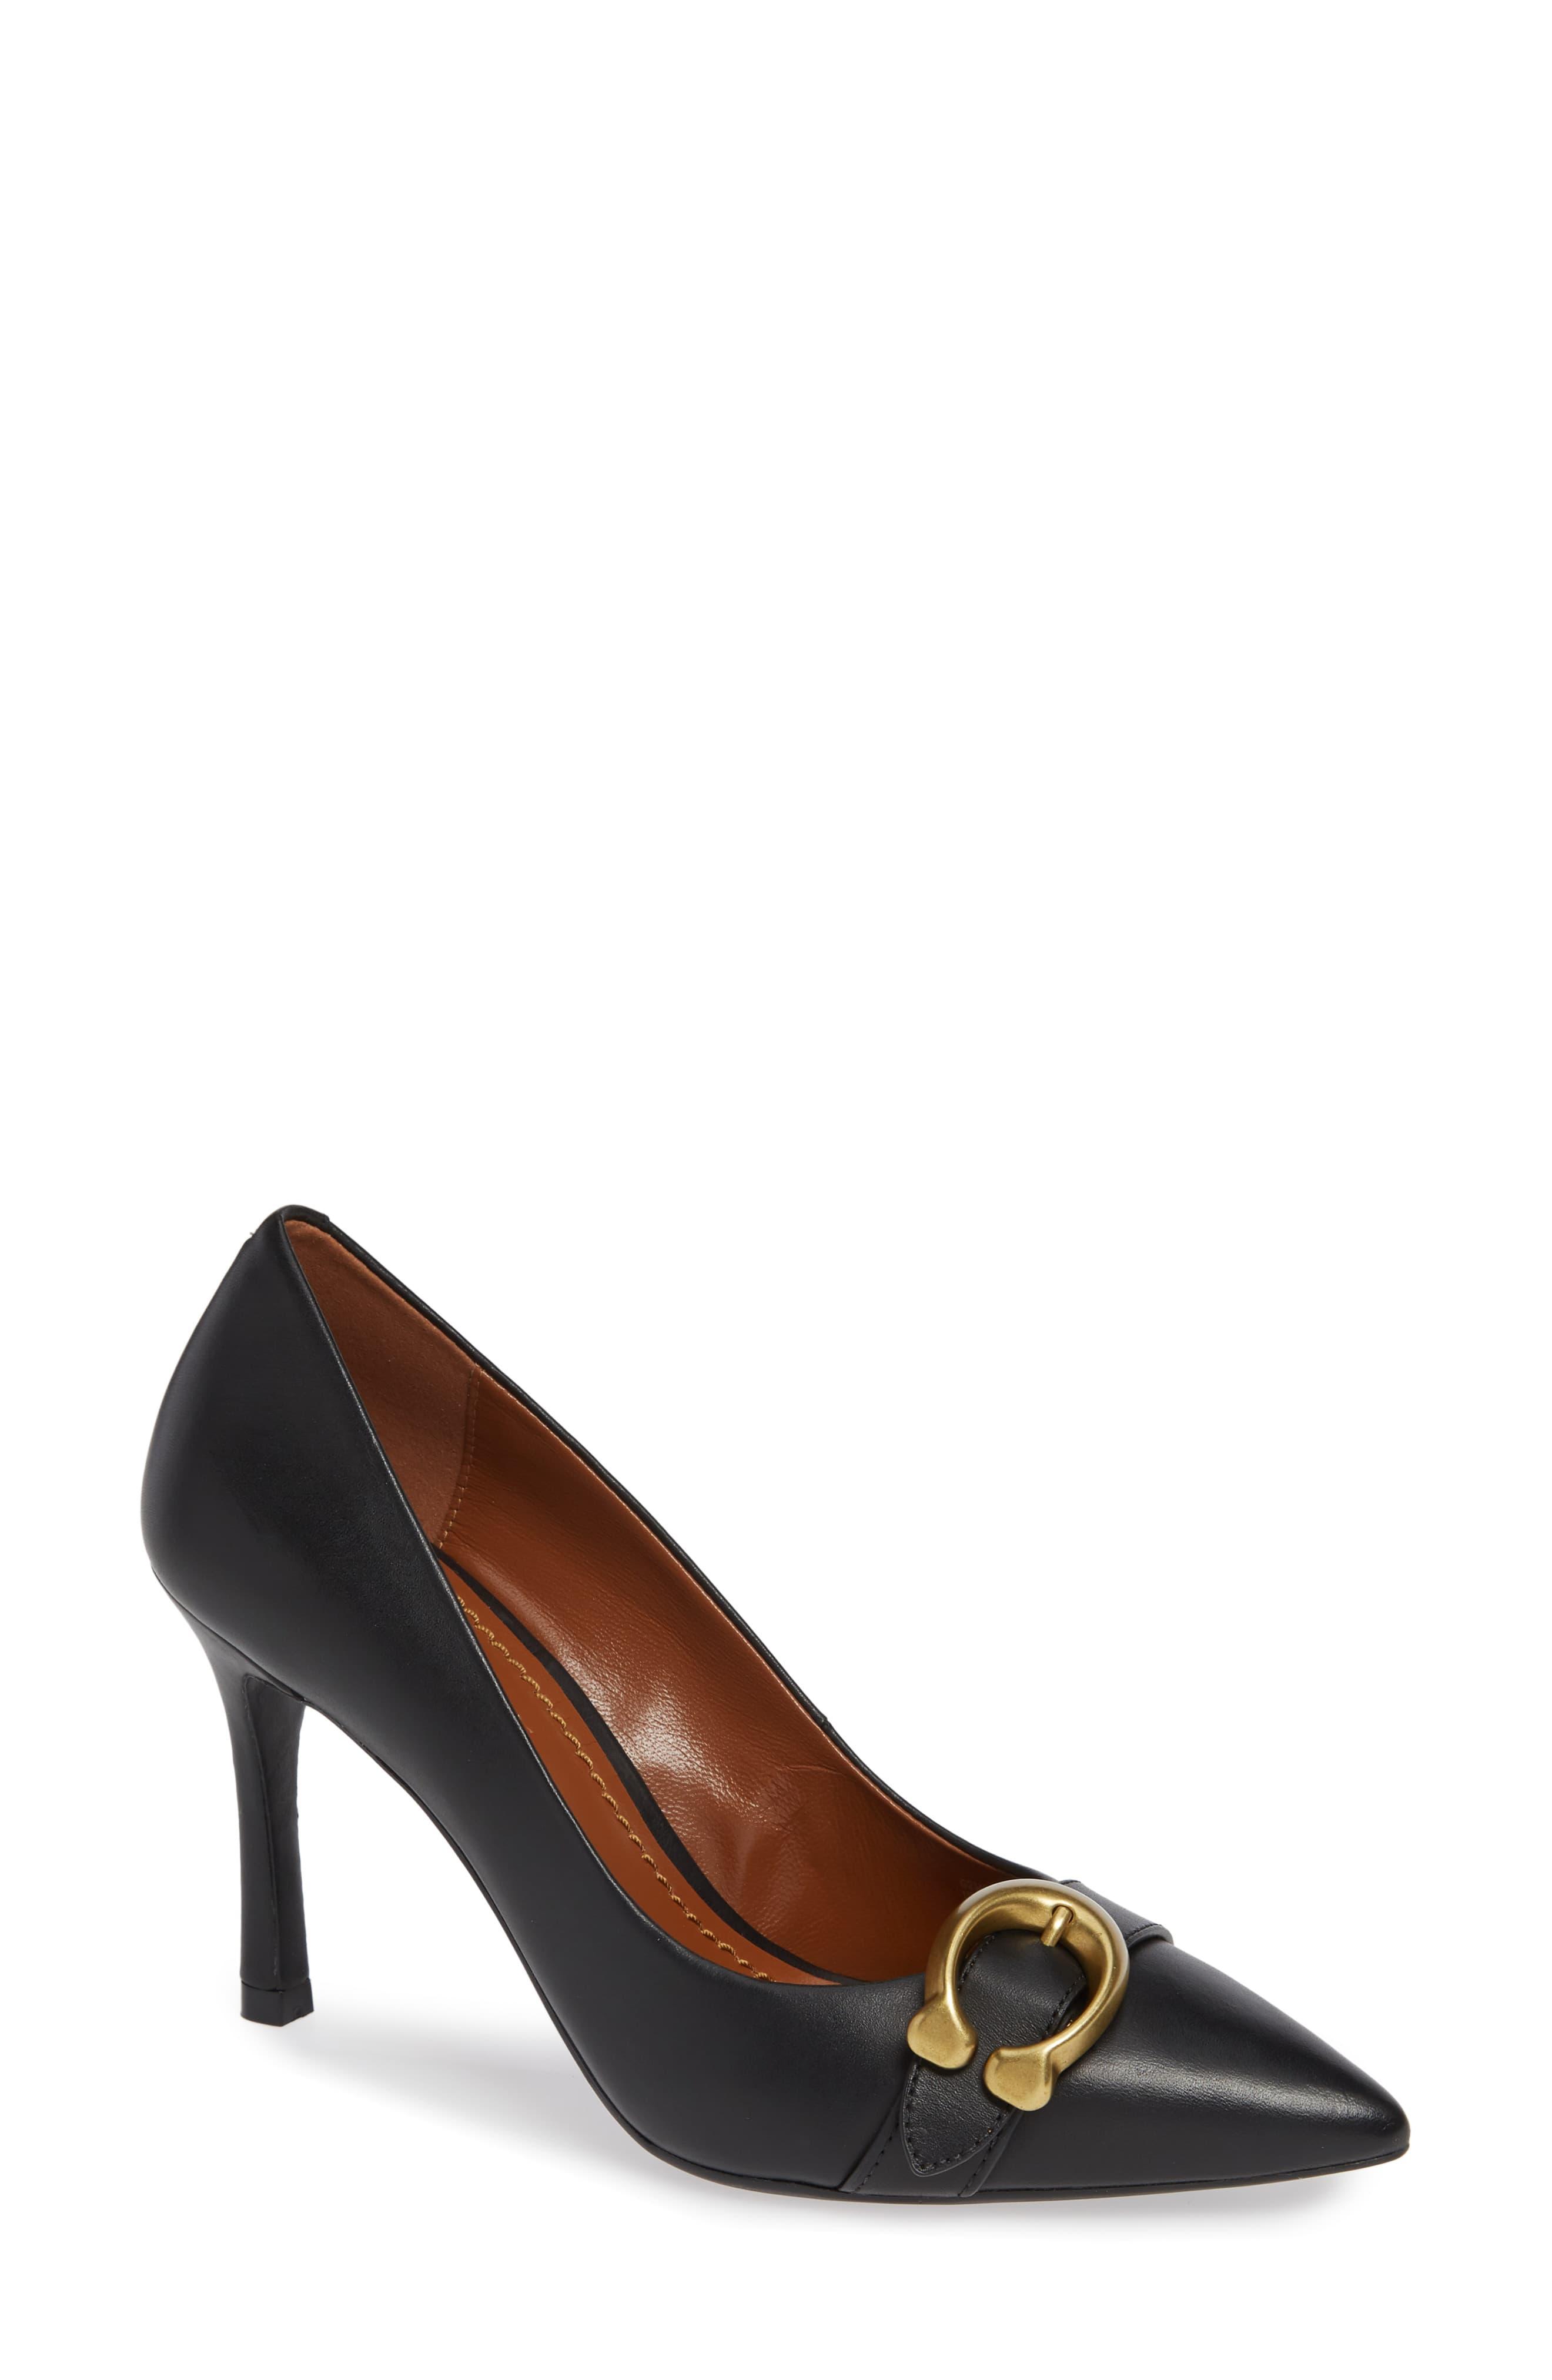 COACH Waverly Signature Buckle Leather Pump in Black - Save 40% - Lyst